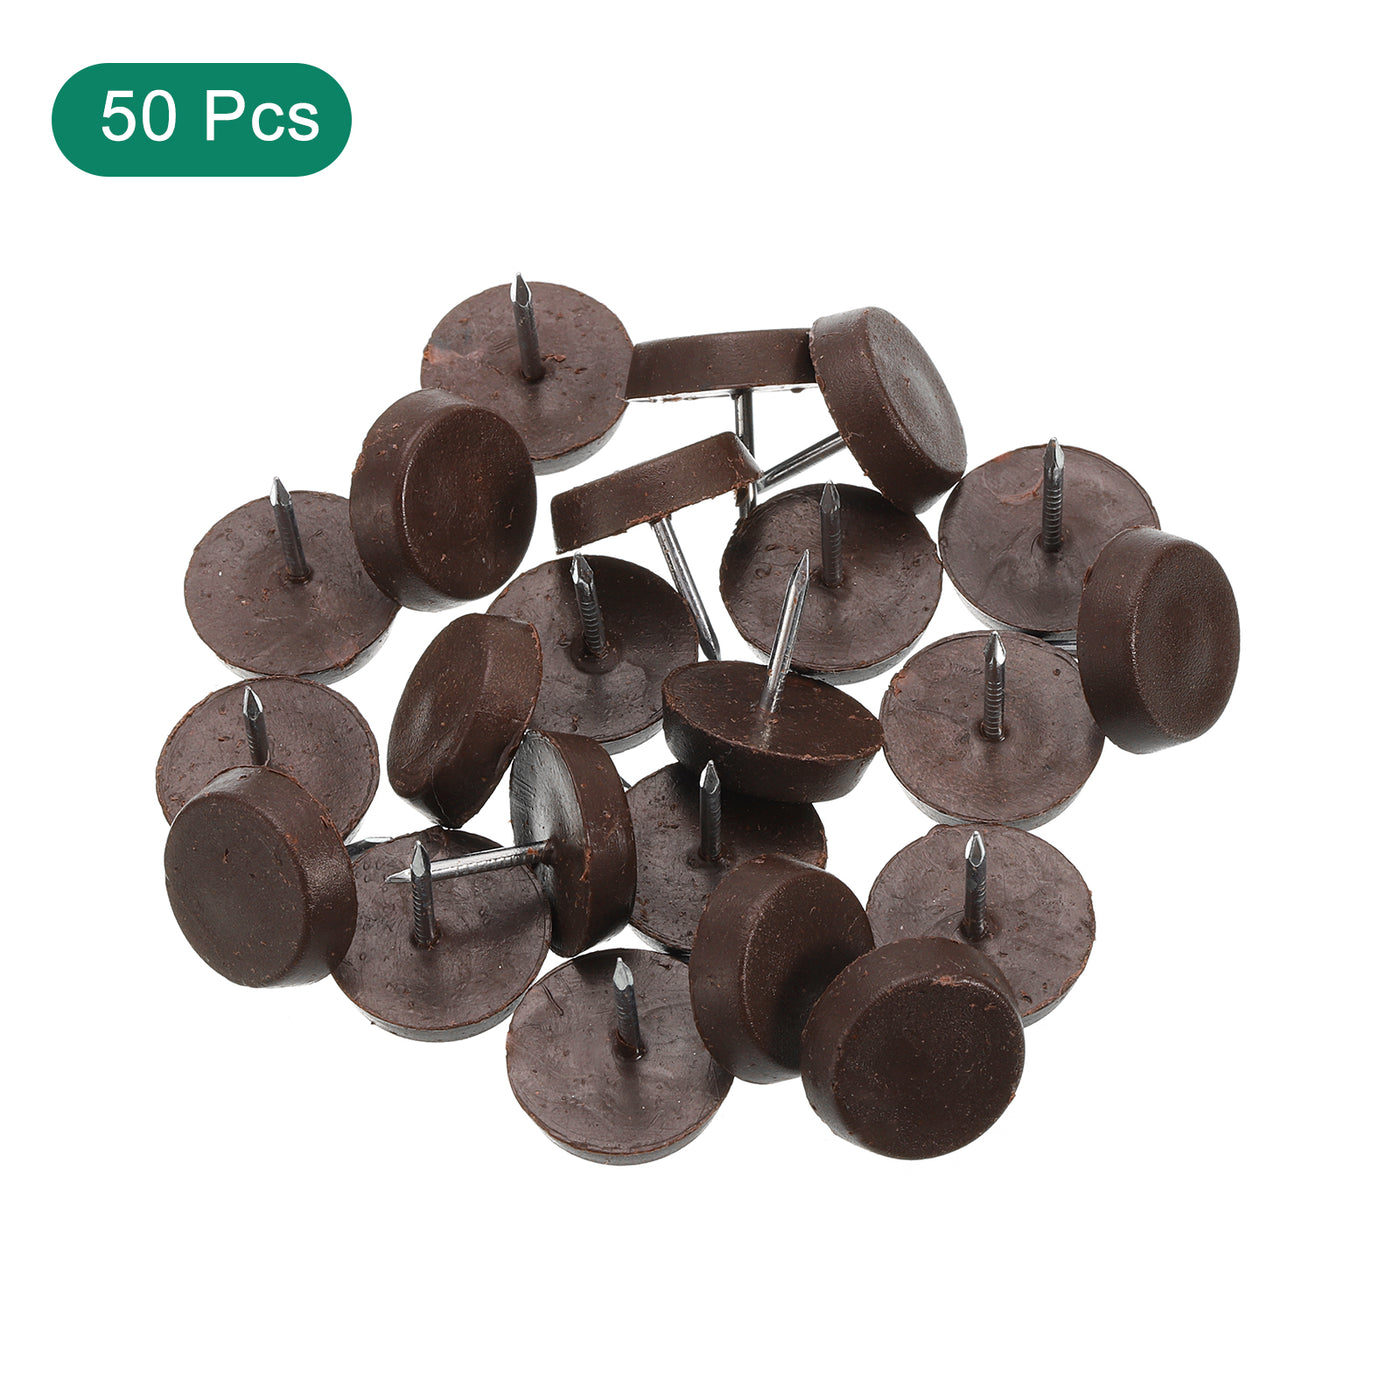 uxcell Uxcell Nail on Furniture Glides, 50pcs 19mm Plastic Furniture Feet Sliders, Brown